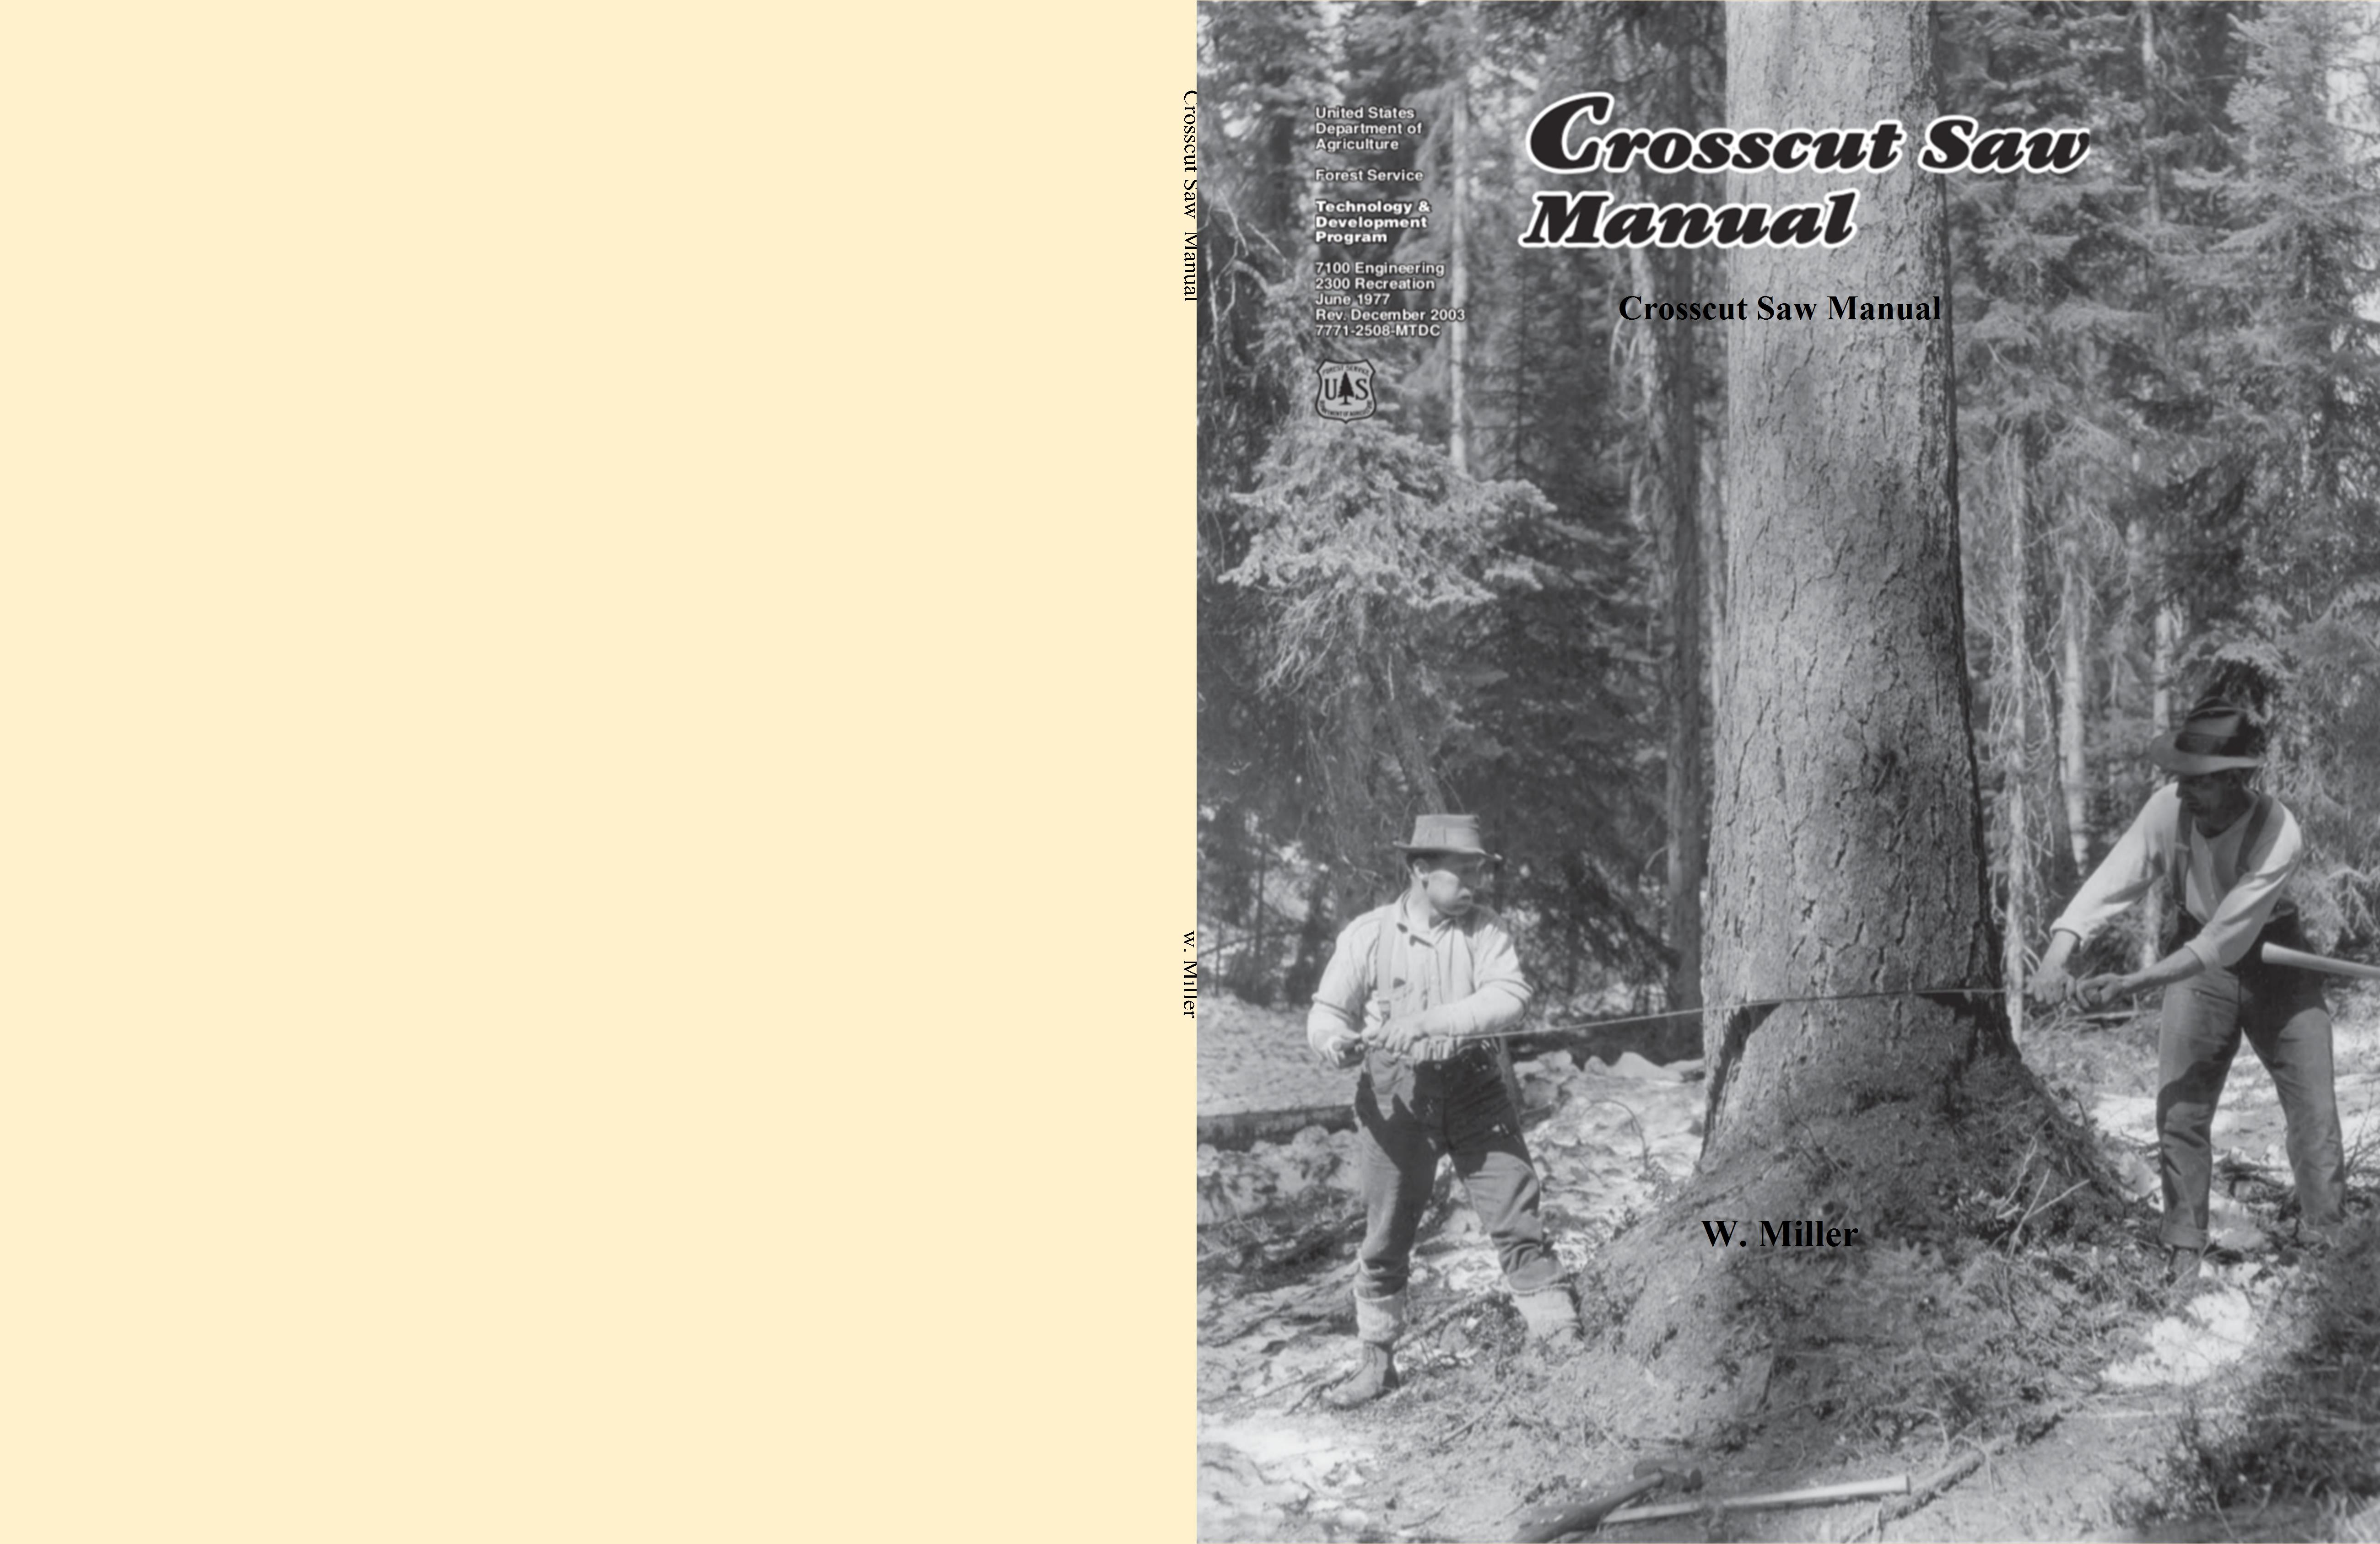 Crosscut Saw Manual cover image